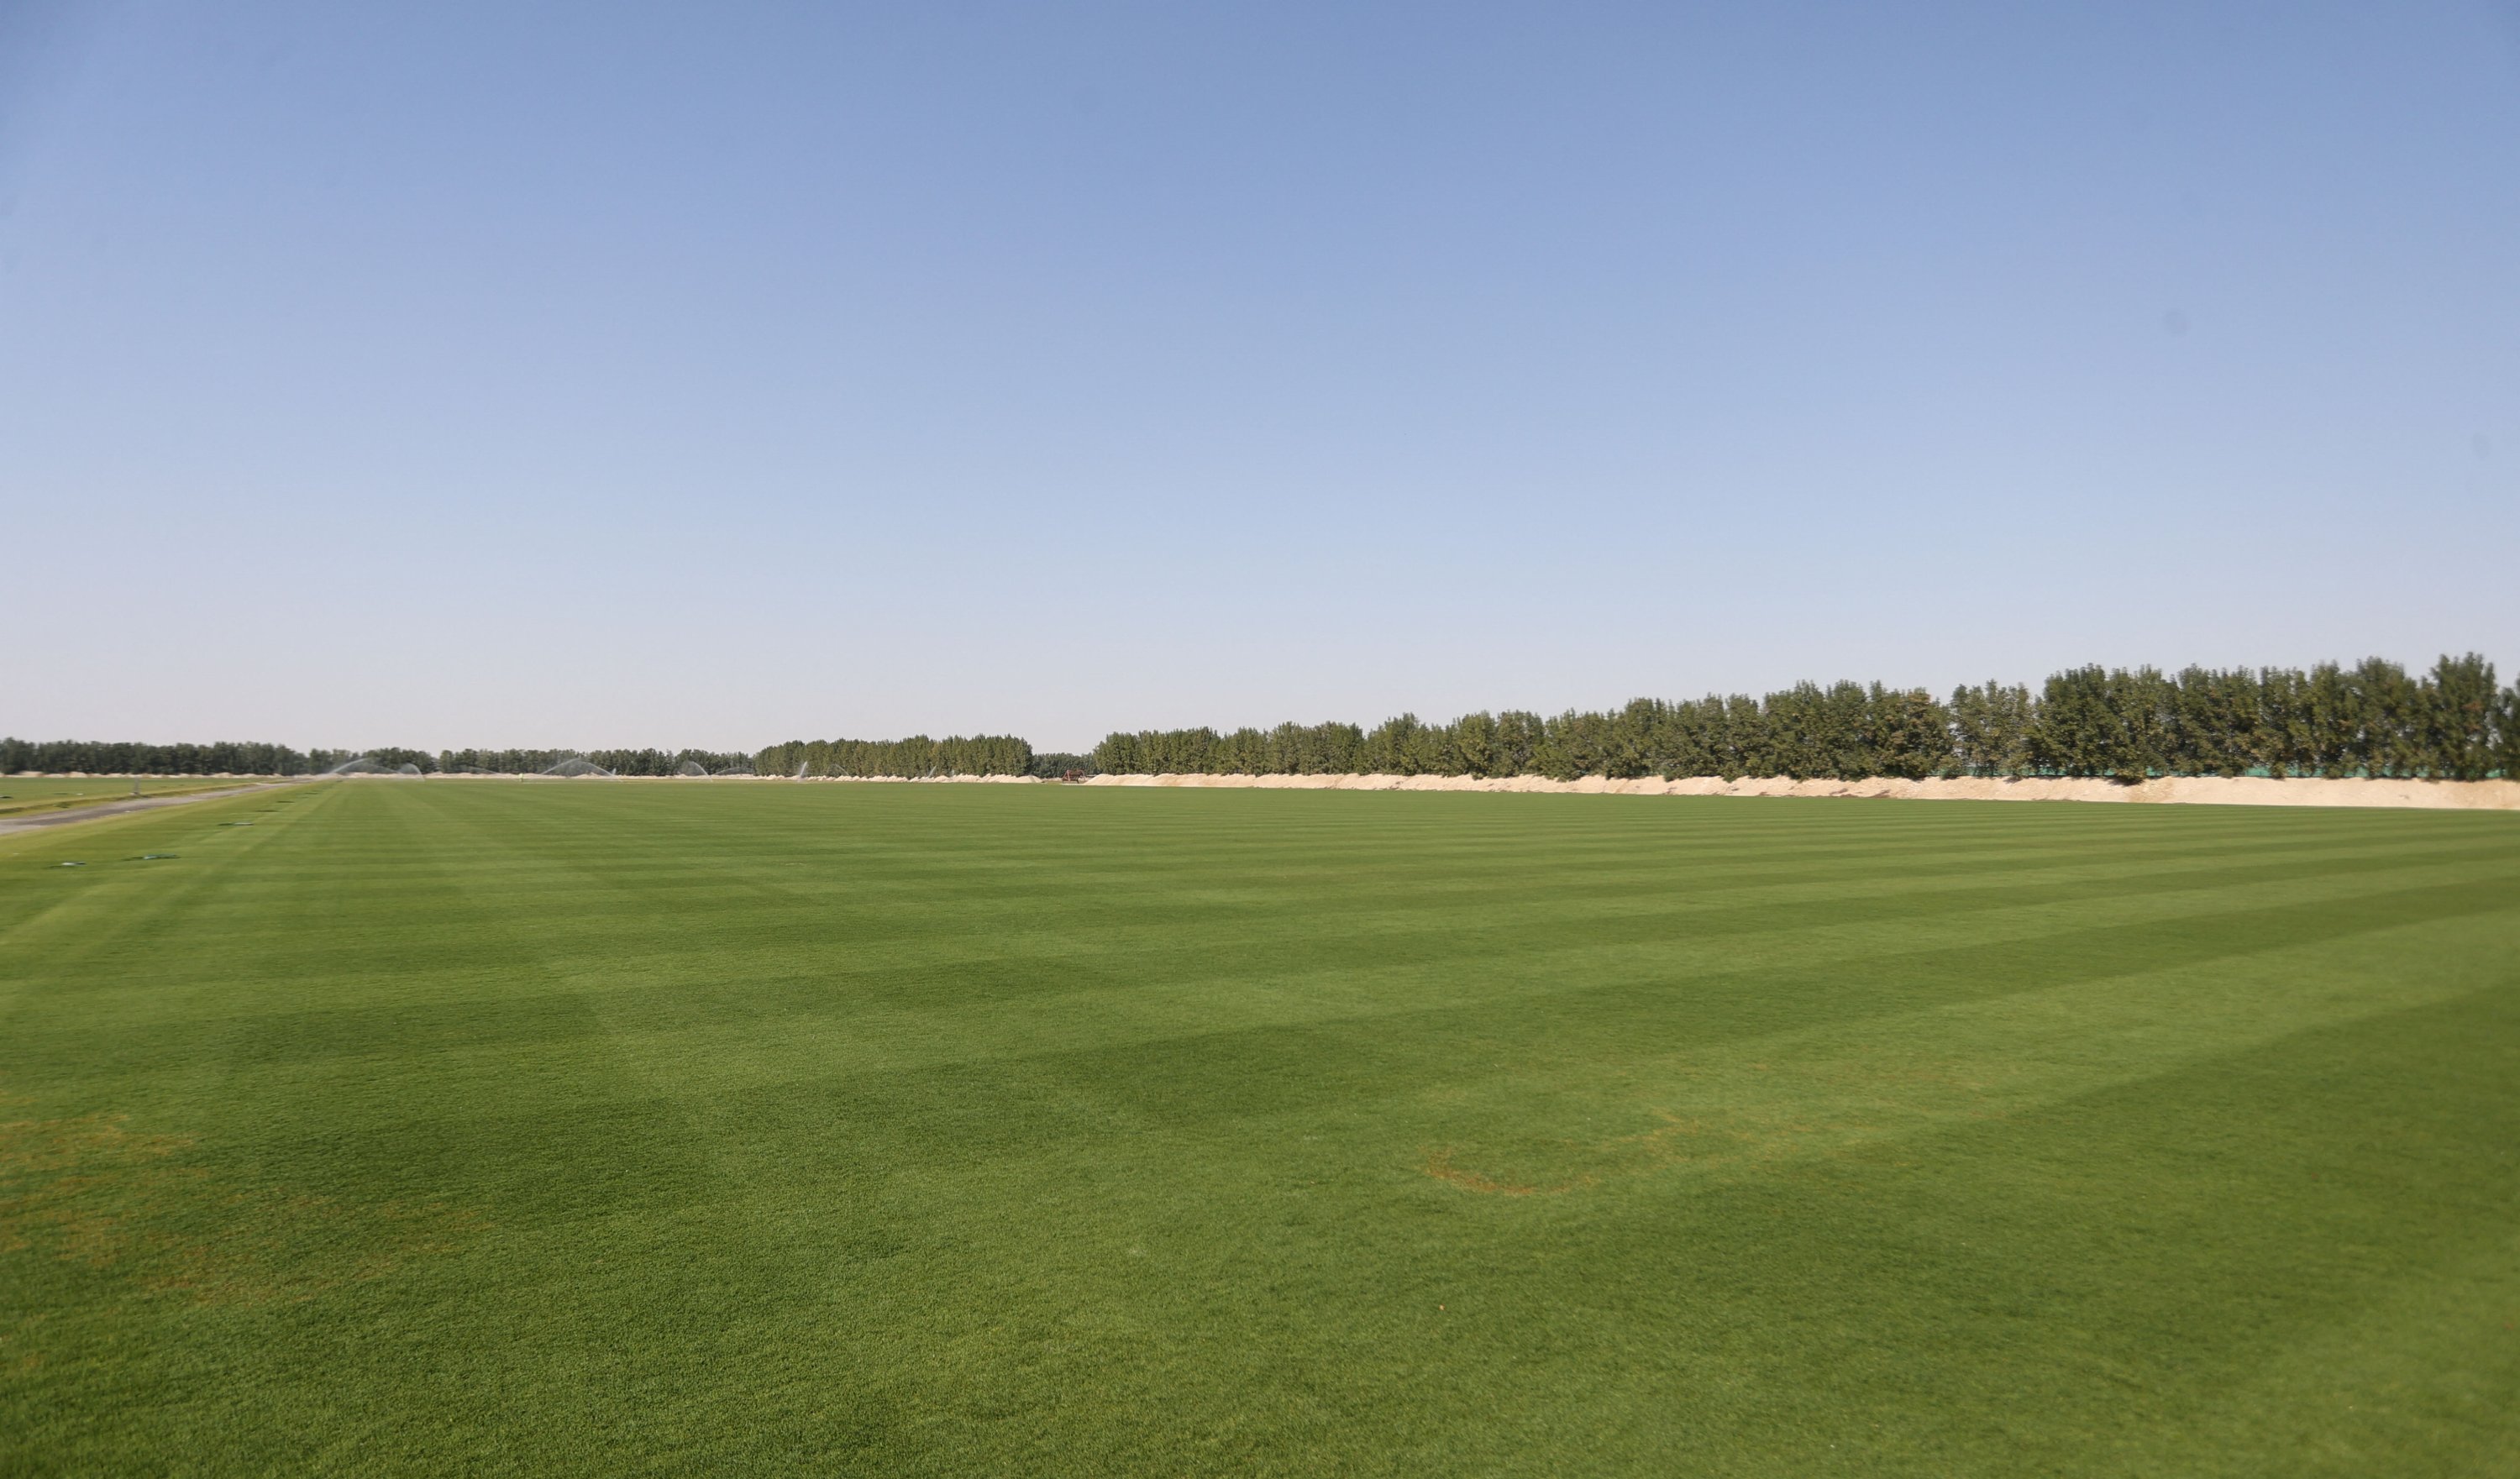 A general view of a turf nursery at the Umm Slal, in Doha, Qatar, Feb. 3, 2022. (Reuters Photo)